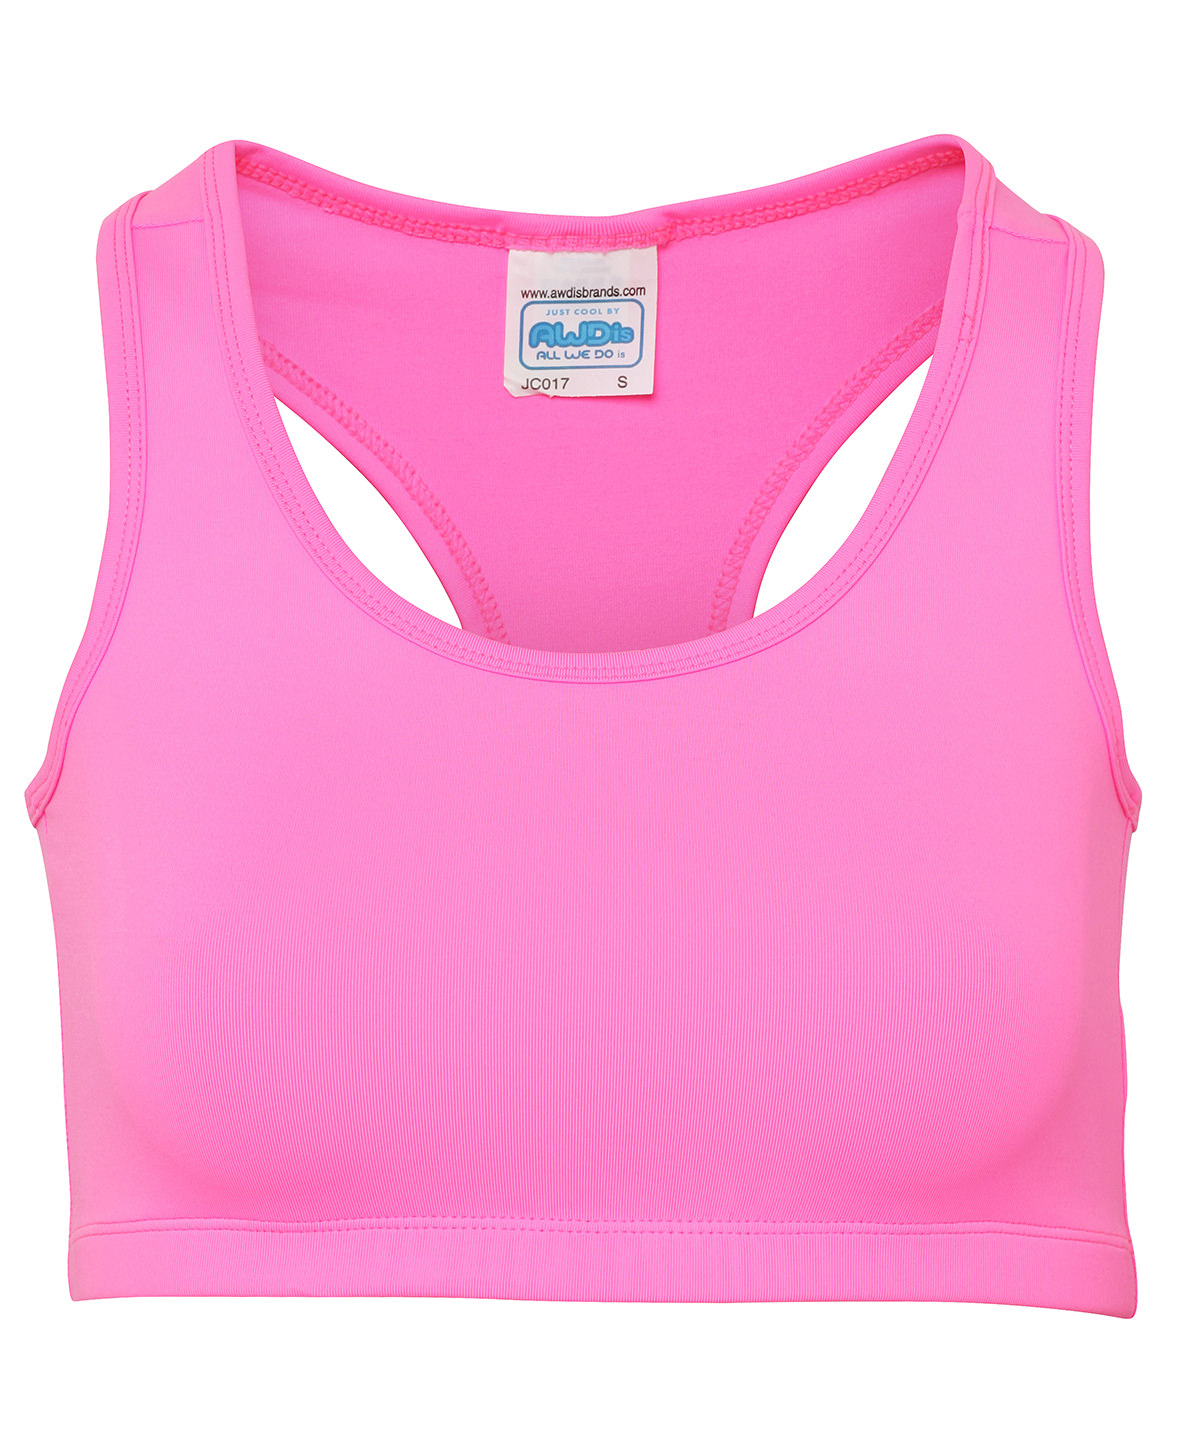 Womens Cool Sports Crop Top Electric Pink Size XSmall